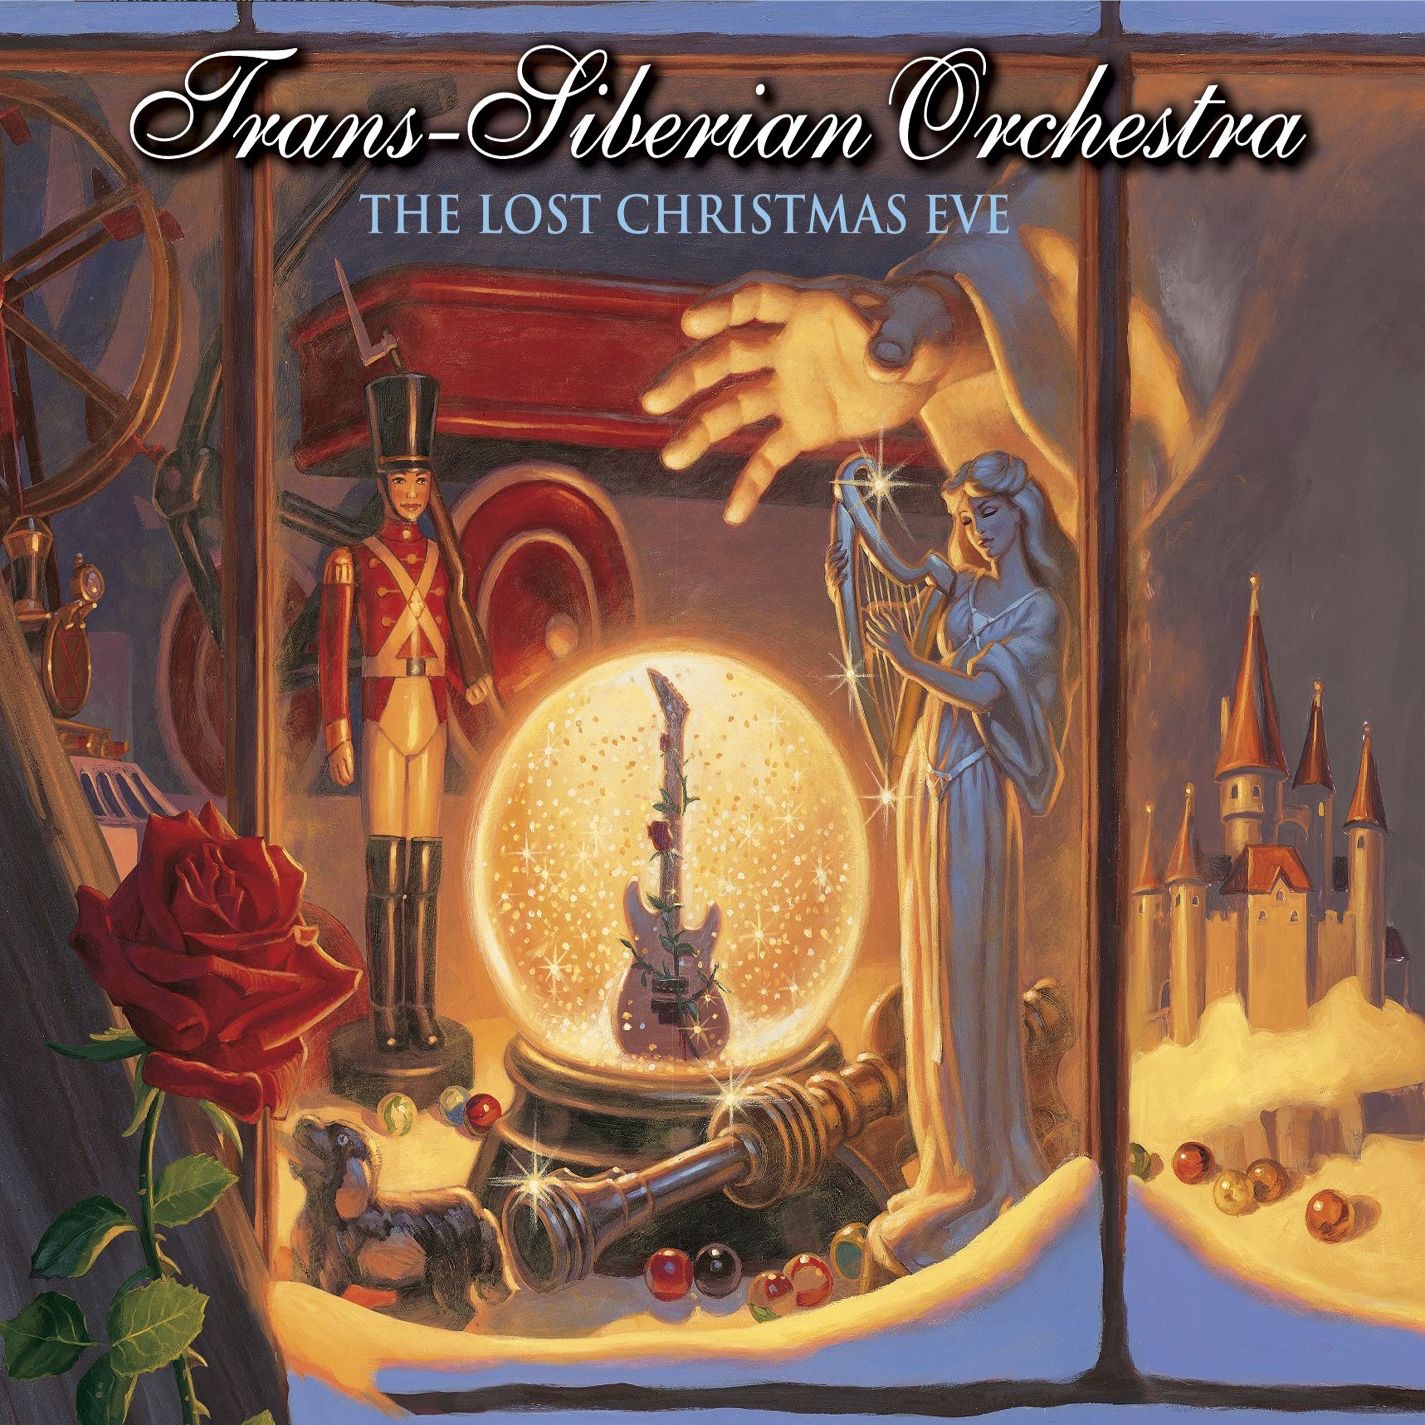 Art for Wizards in Winter (Instrumental) by Trans-Siberian Orchestra